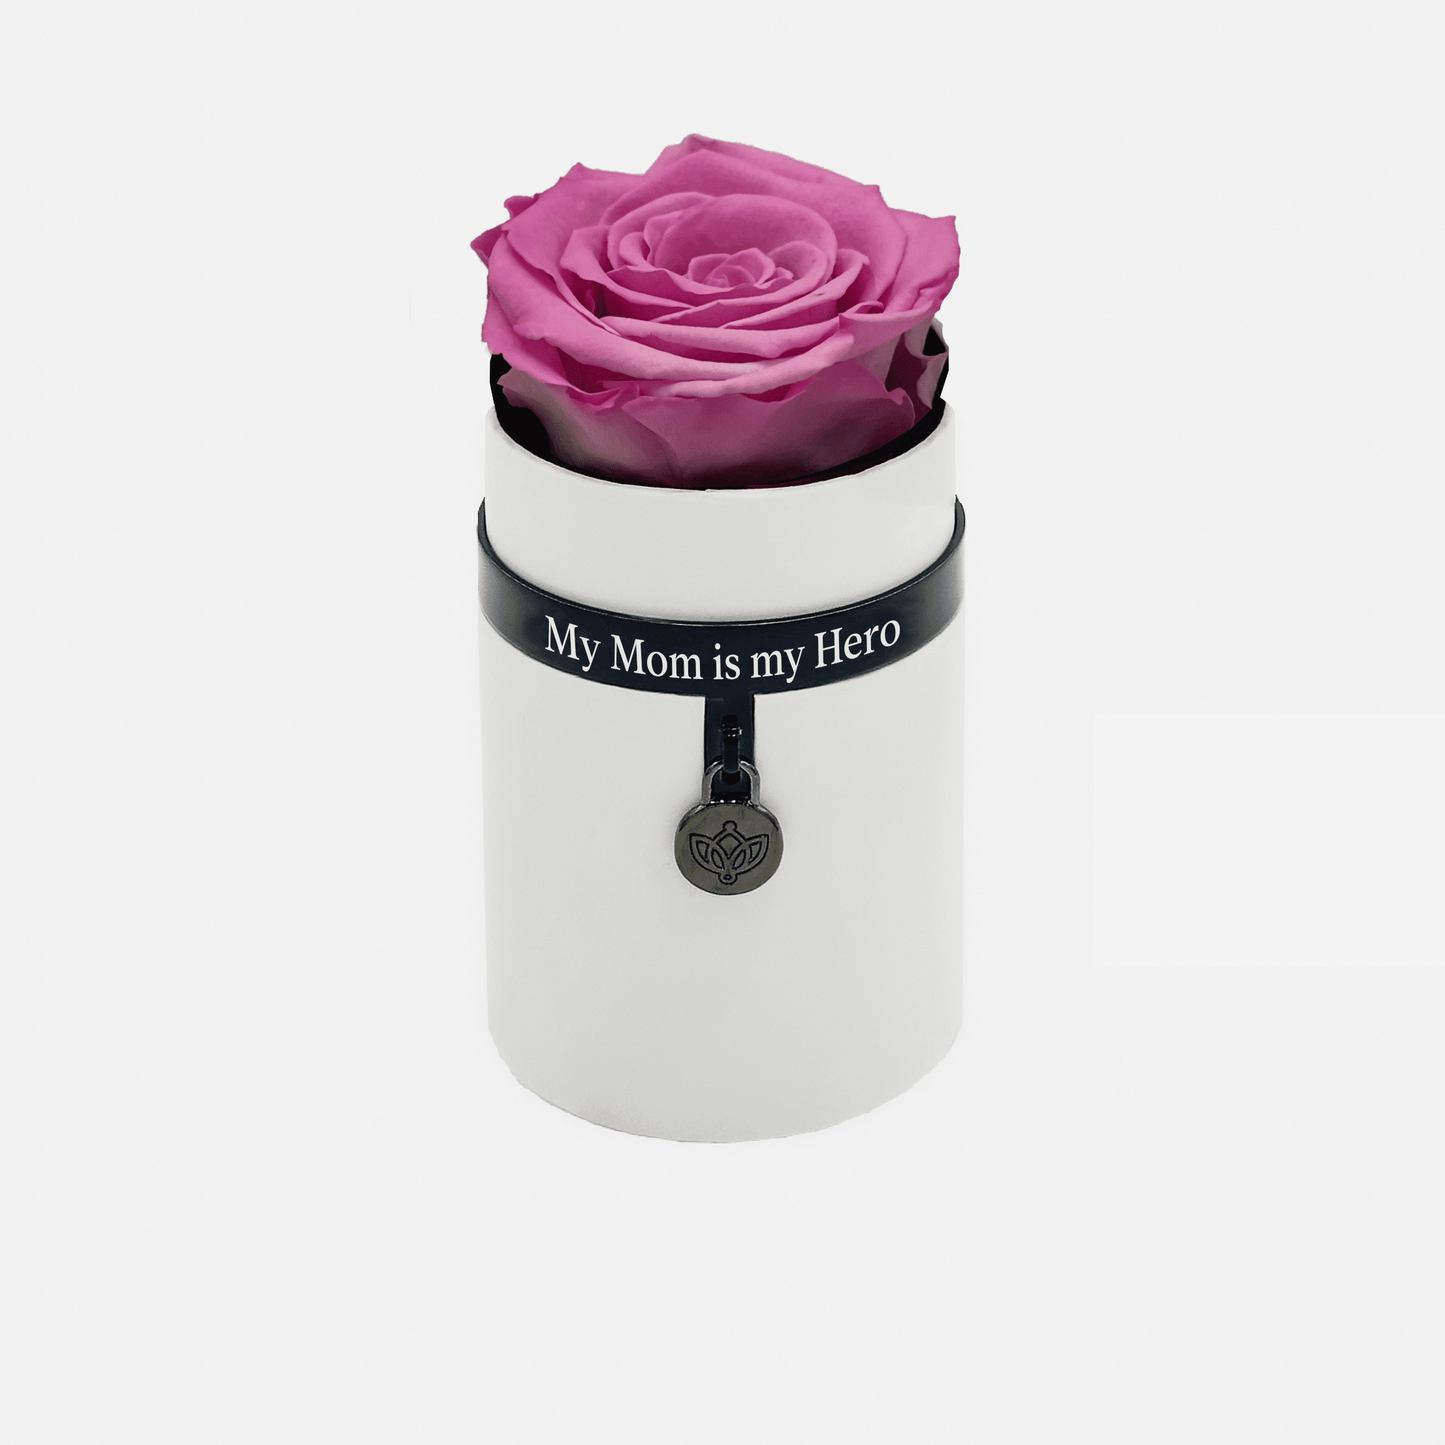 One in a Million™ Round White Box | My Mom is my Hero | Candy Pink Rose